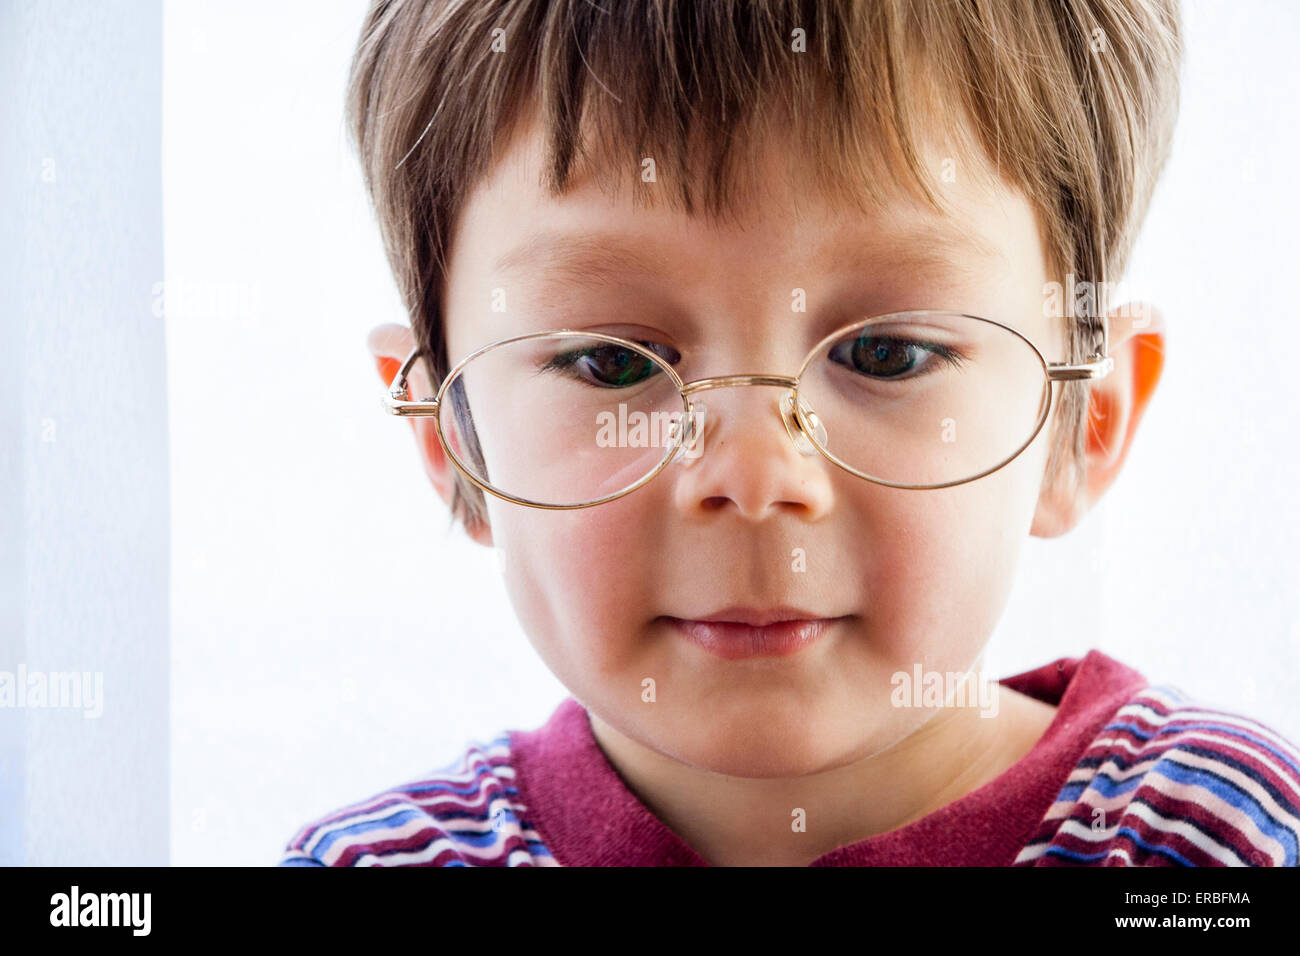 Face shot, close up of cute young child, boy with brown hair 4-5 year old,  looking down and smiling while wearing a pair of spectacles, glasses Stock  Photo - Alamy